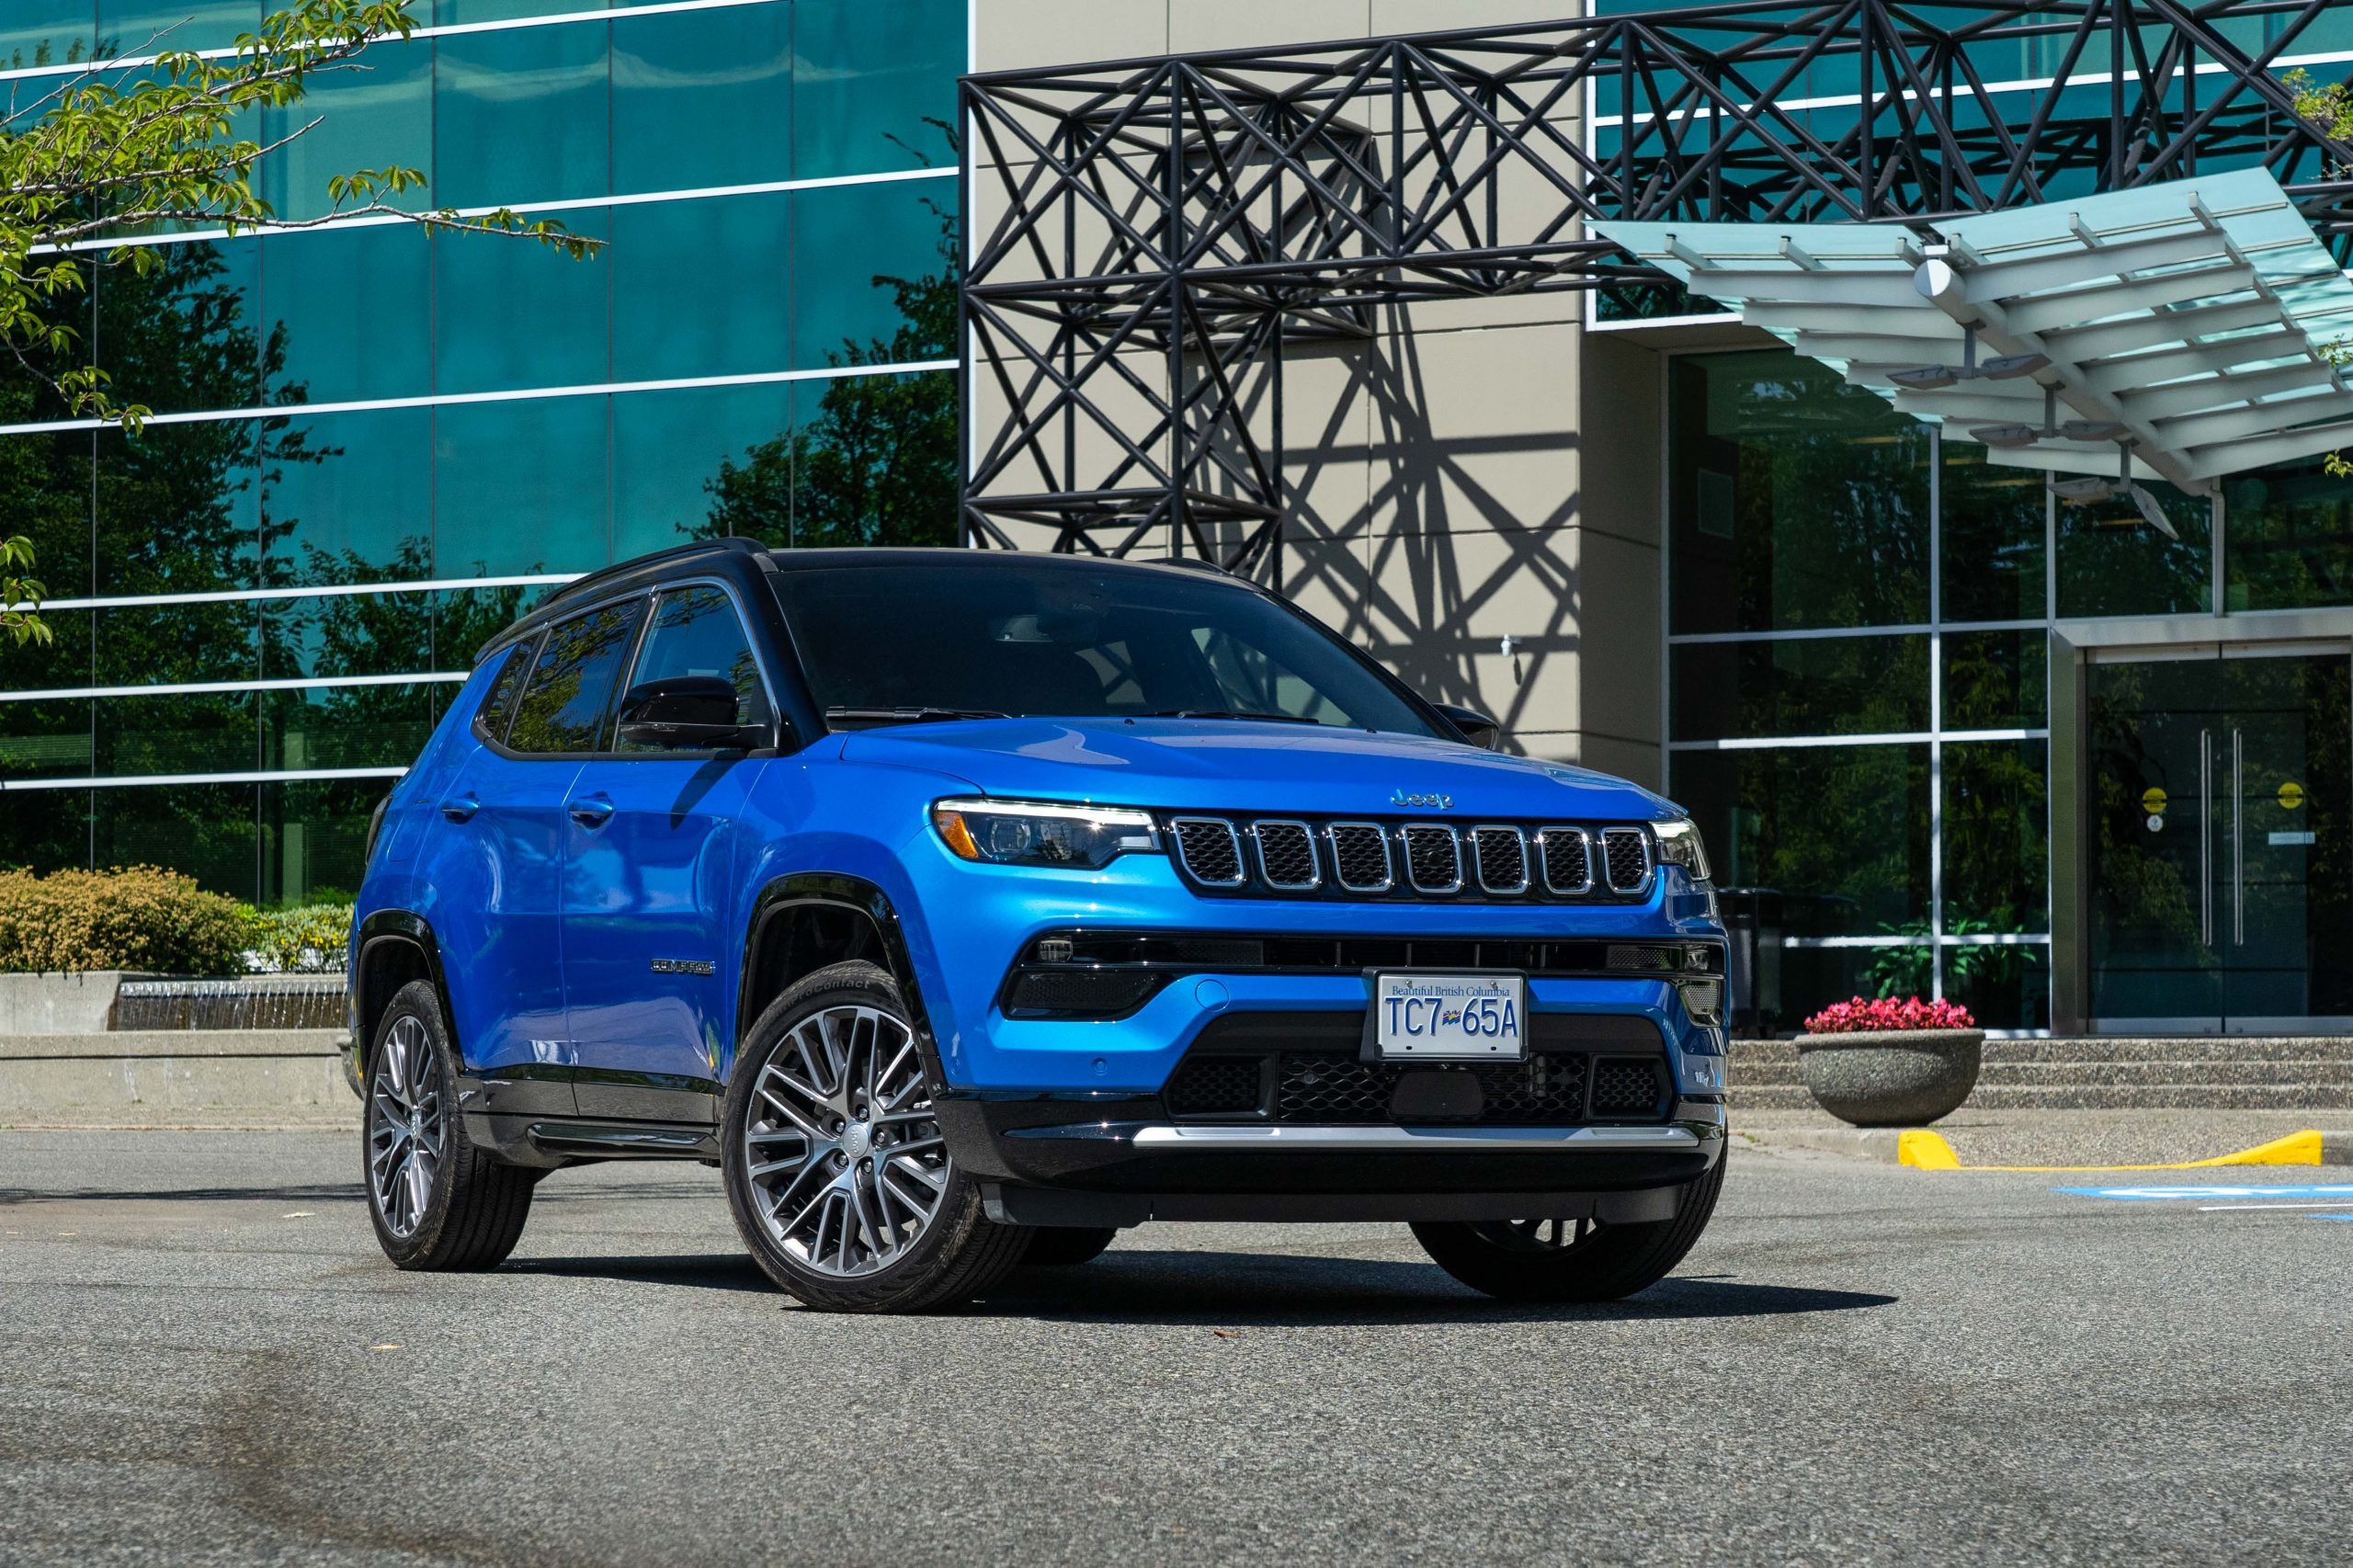 2021 Jeep Compass Review - Autotrader